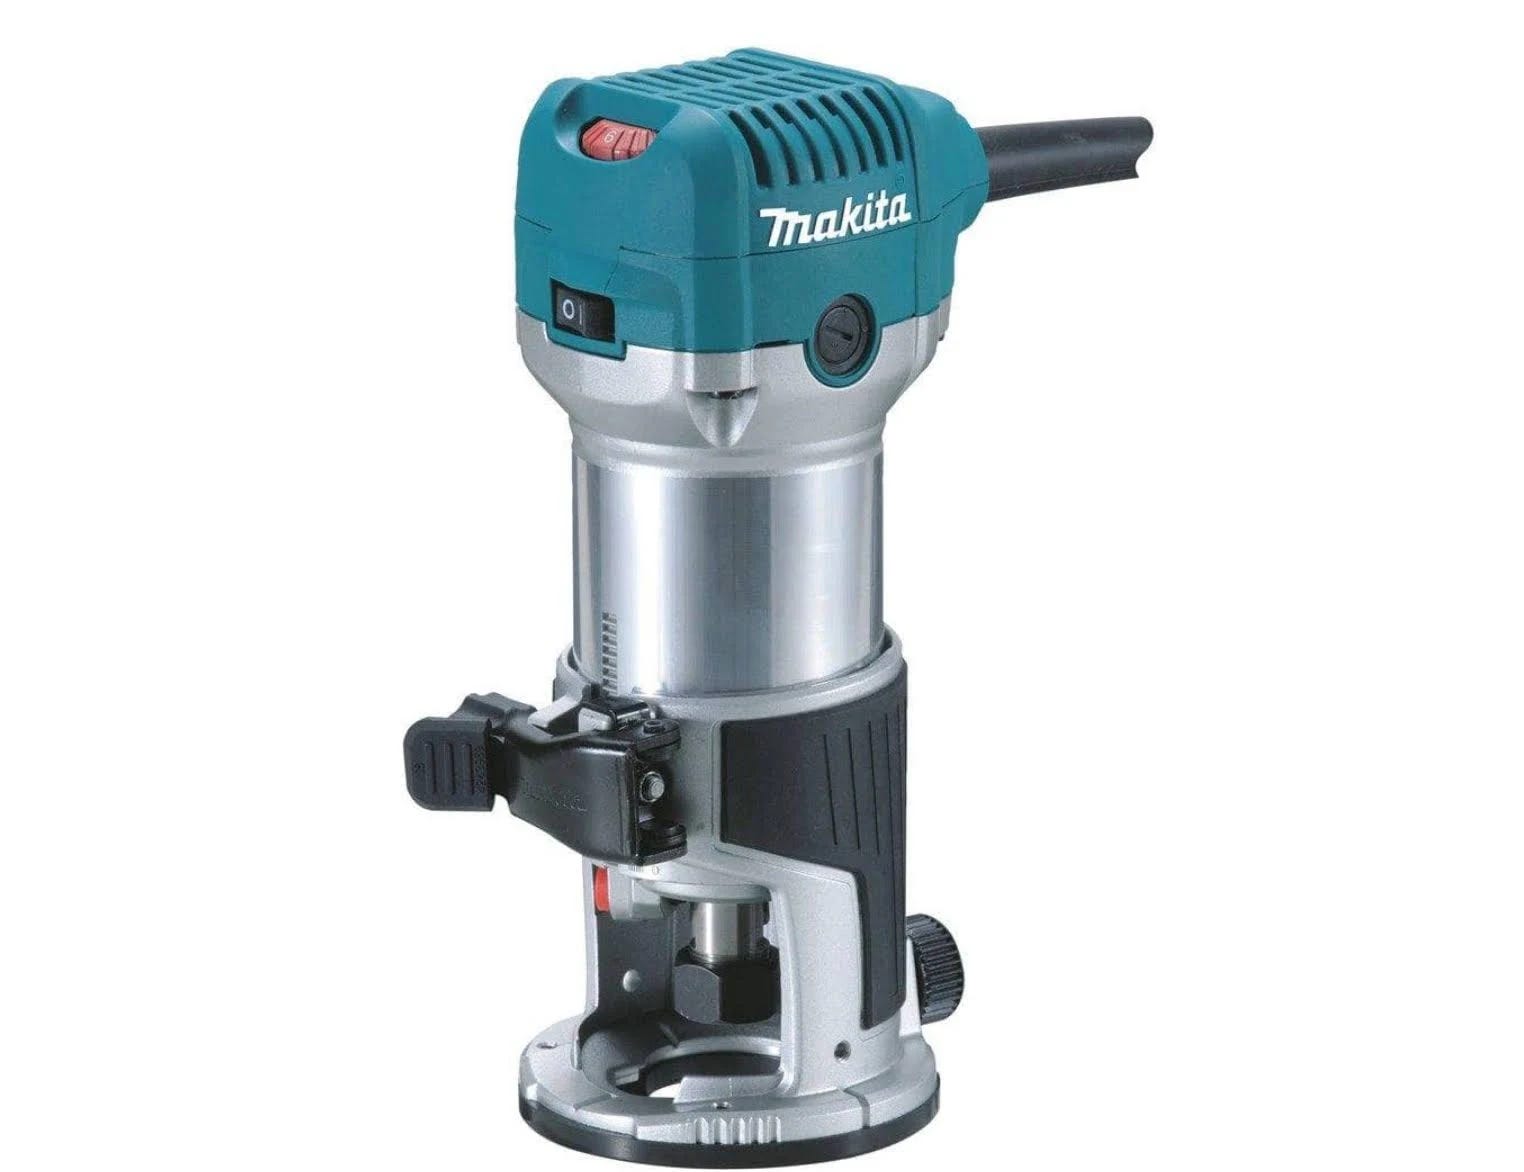 Makita RT0701C-R Compact Router with Micro-Fine Depth Adjustment | Image